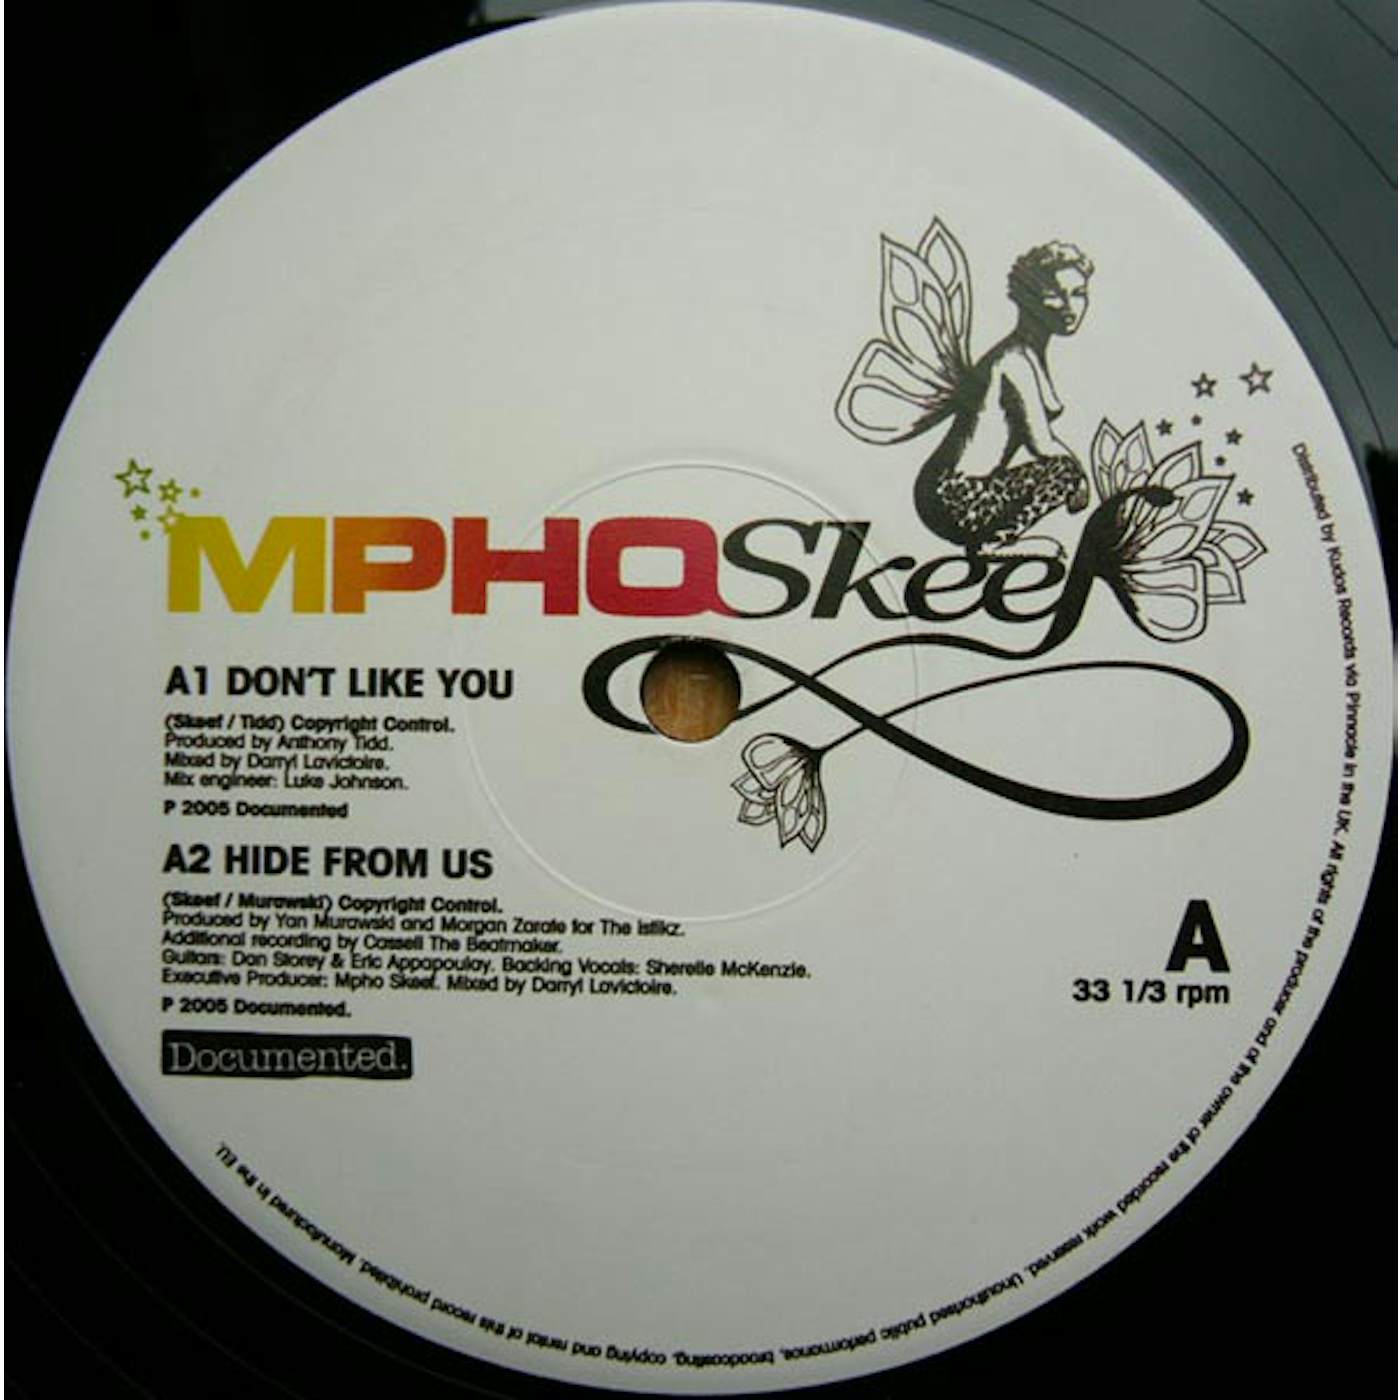 Mpho Skeef DON'T LIKE YOU-EP Vinyl Record - UK Release